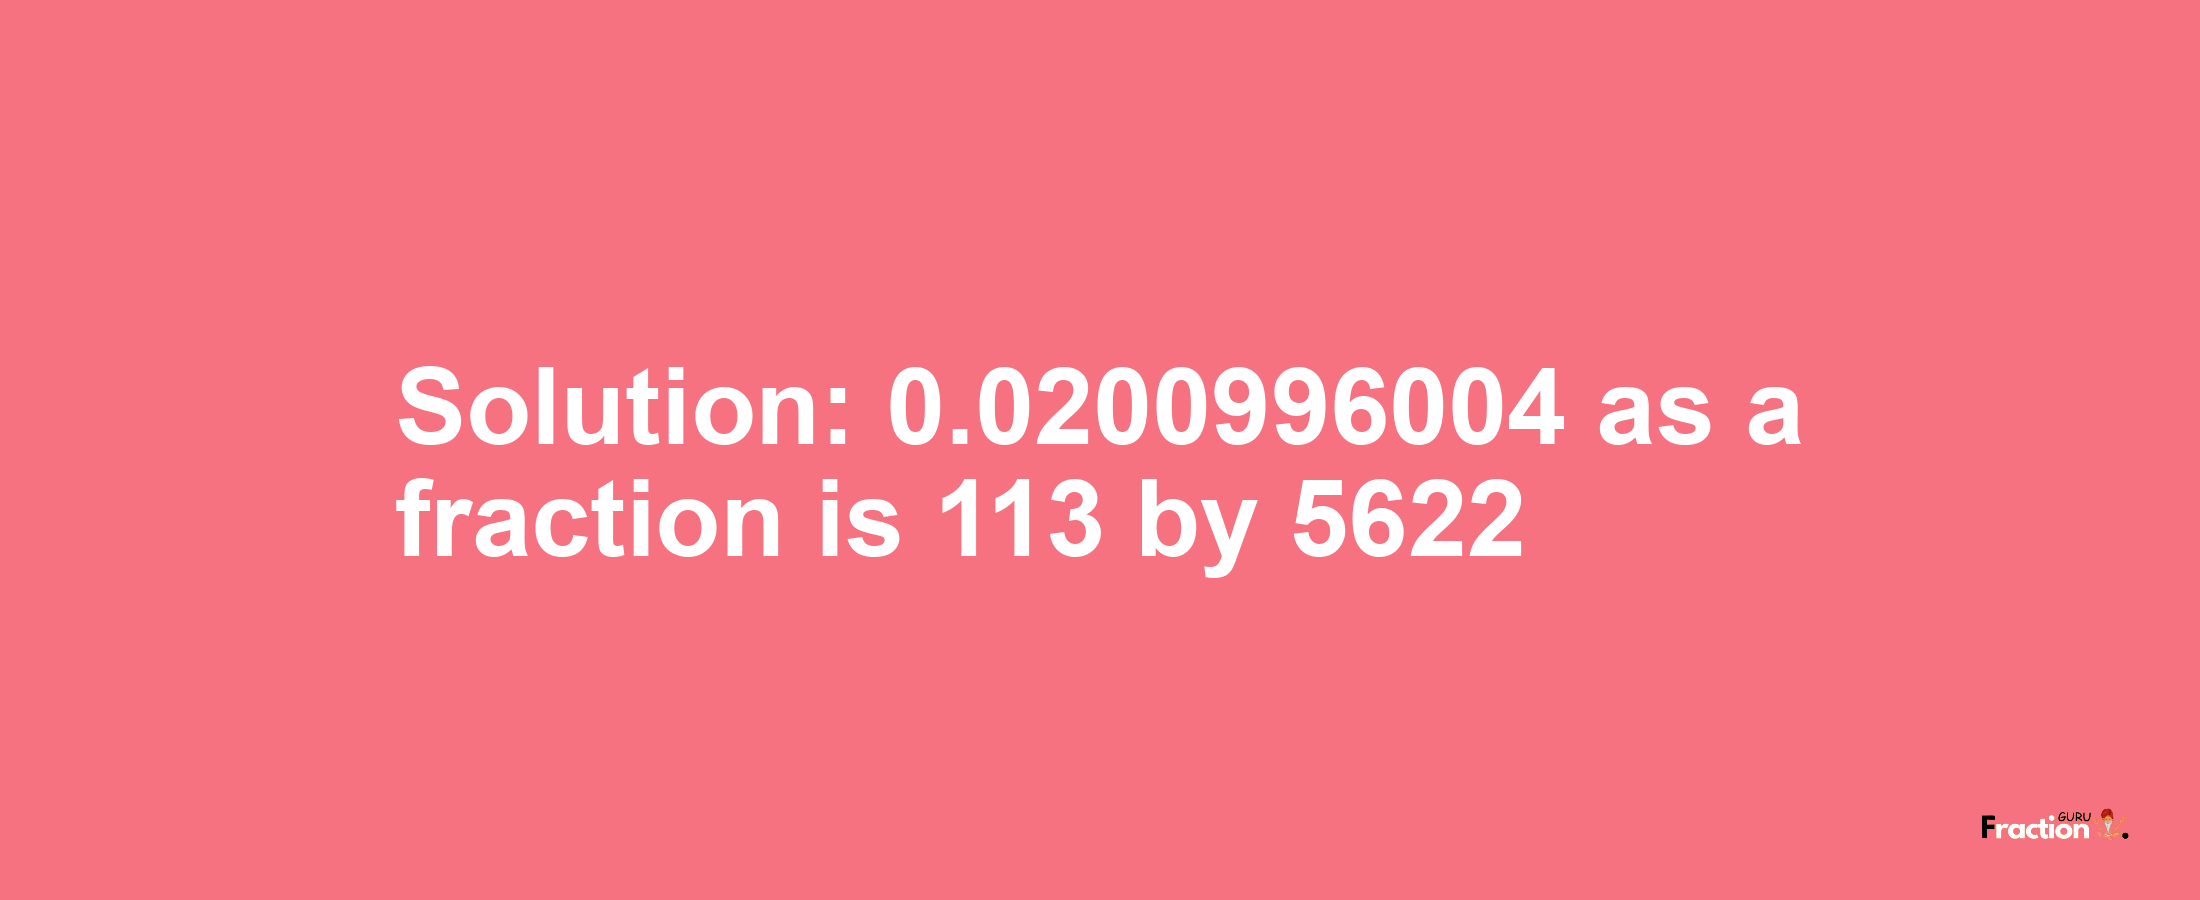 Solution:0.0200996004 as a fraction is 113/5622